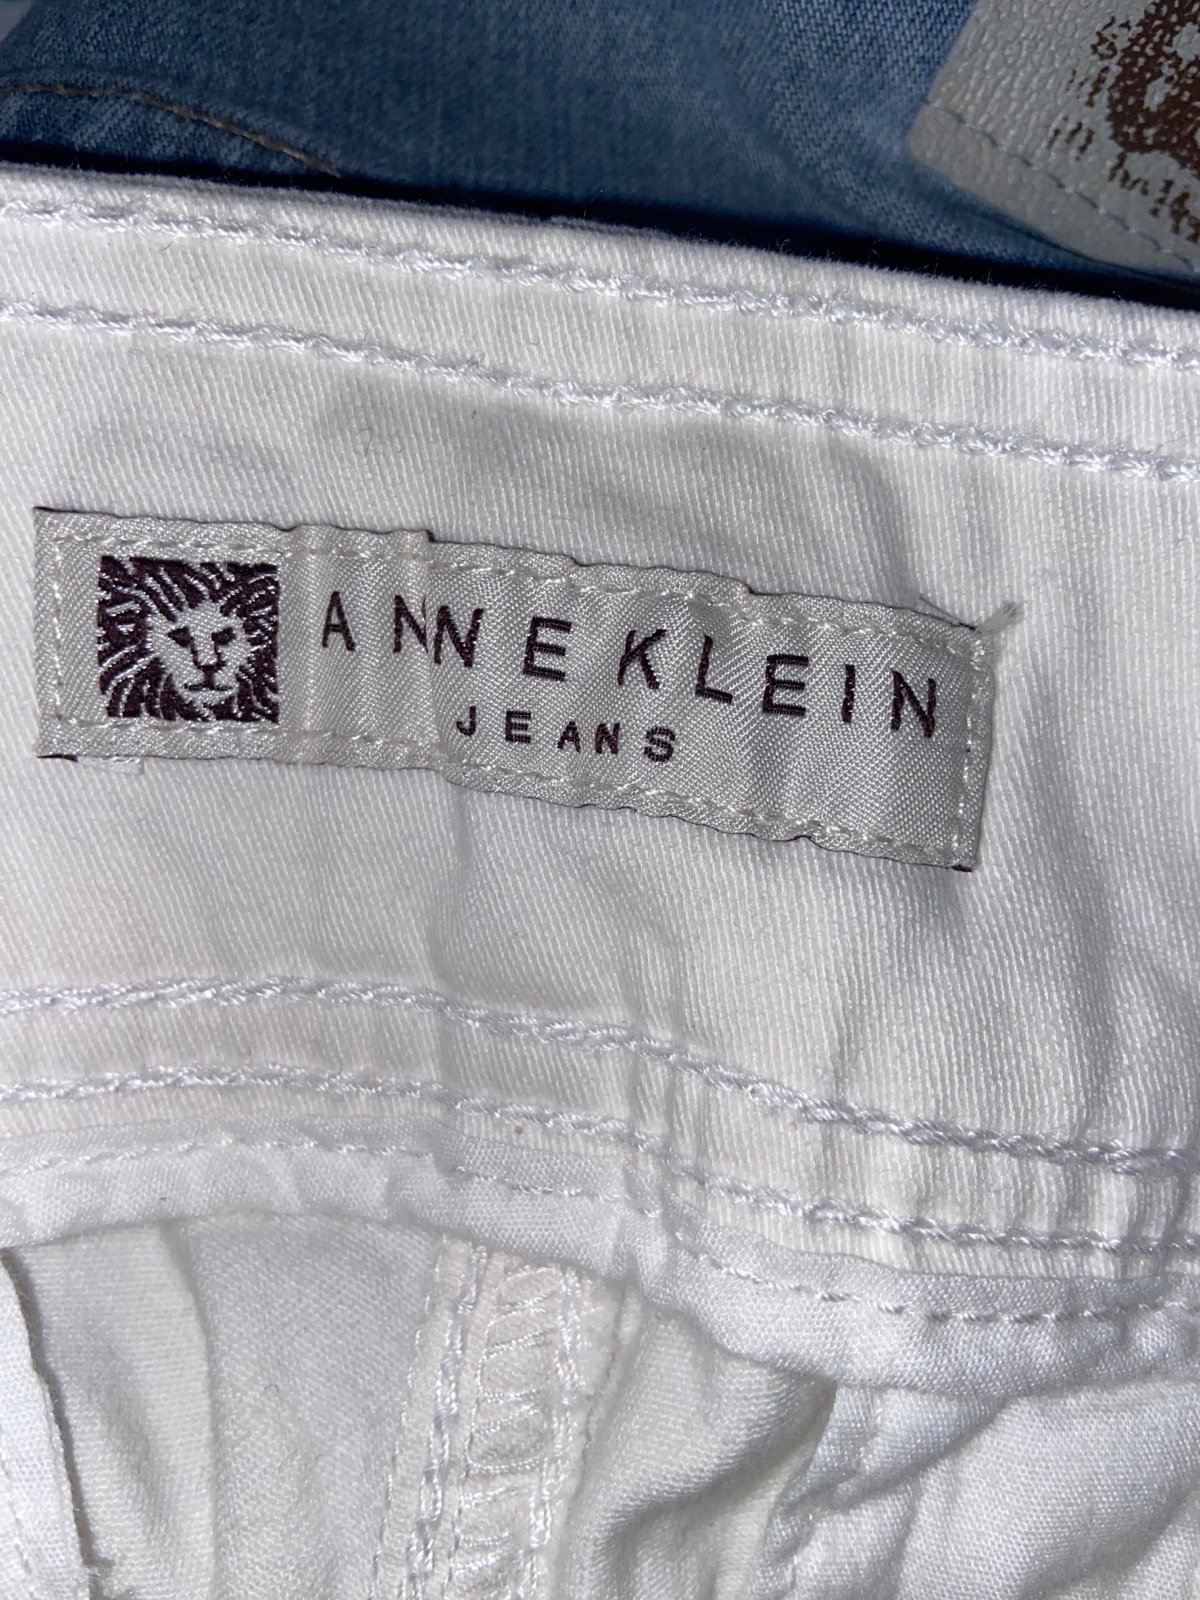 save up to 70% ANNE KLEIN women jeans MLhVLS3ml Buying Cheap